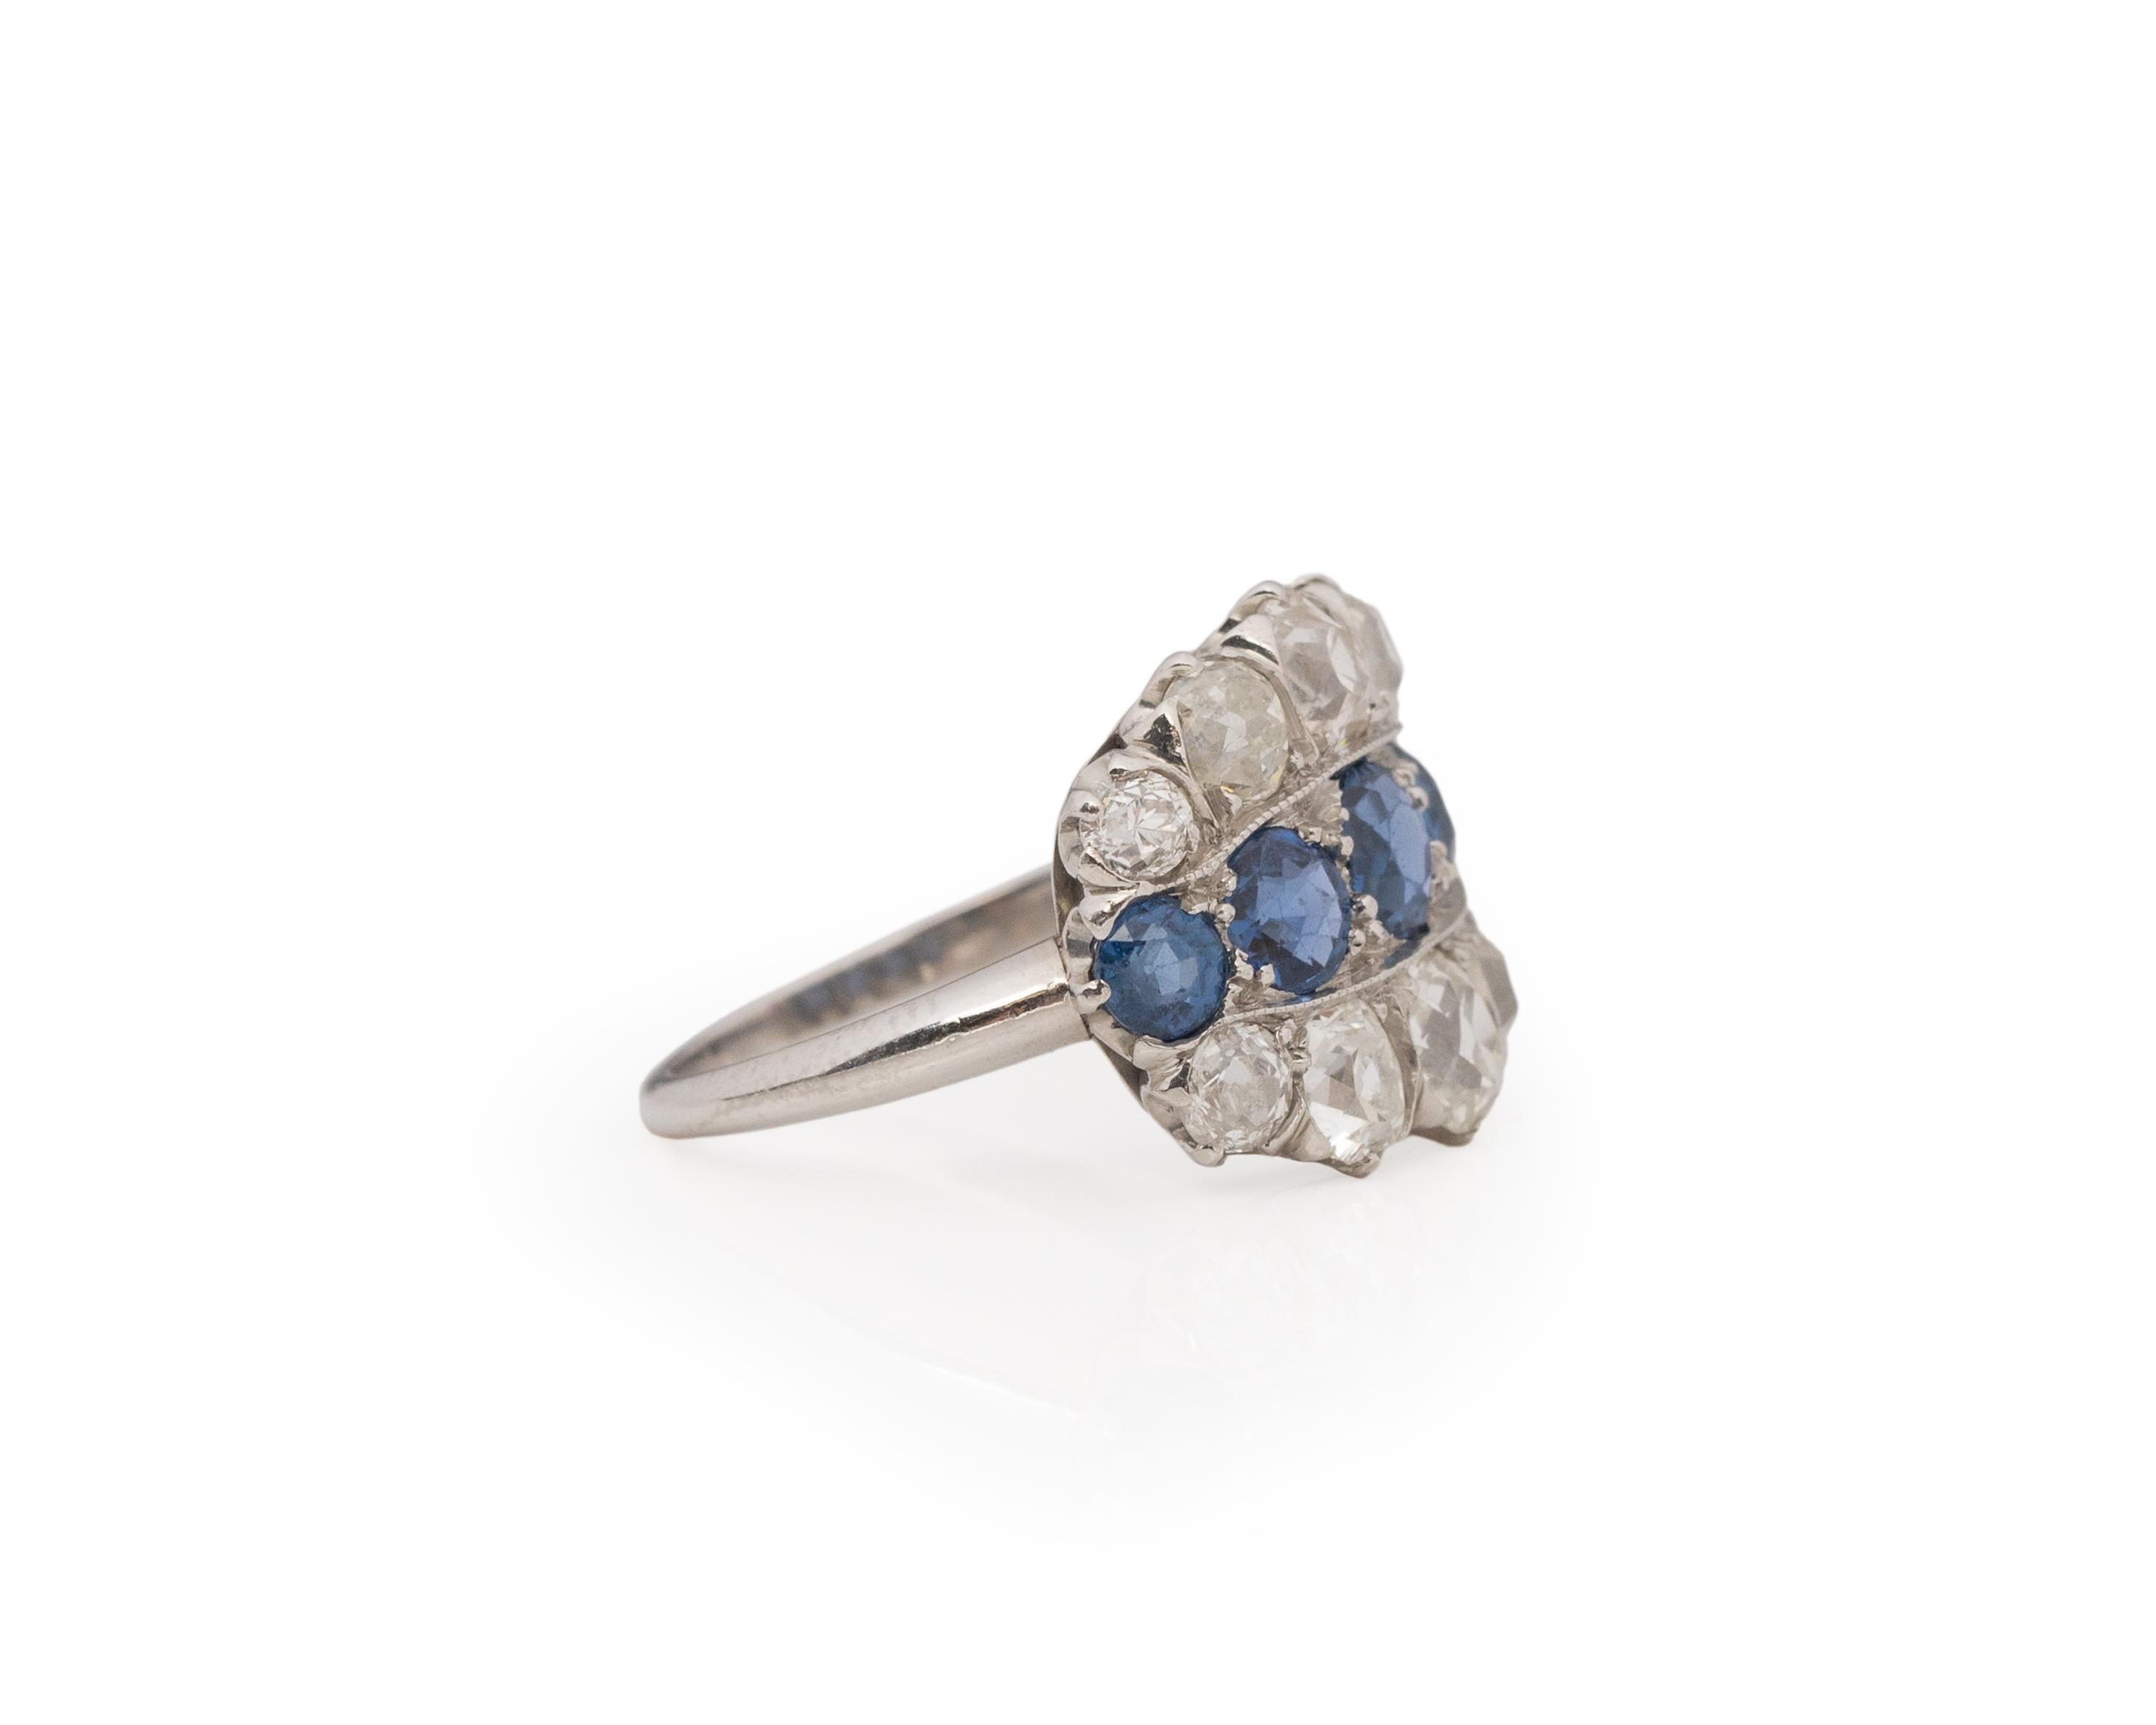 Ring Size: 6
Metal Type: Platinum [Hallmarked, and Tested]
Weight: 6.4 grams

Diamond Details:
Weight: 2.00ct, total weight
Cut: Old Mine brilliant
Color: H-I
Clarity: VS-SI

Sapphire Details:
Natural, Unheated. Blue.
1.50ct, total weight

Finger to